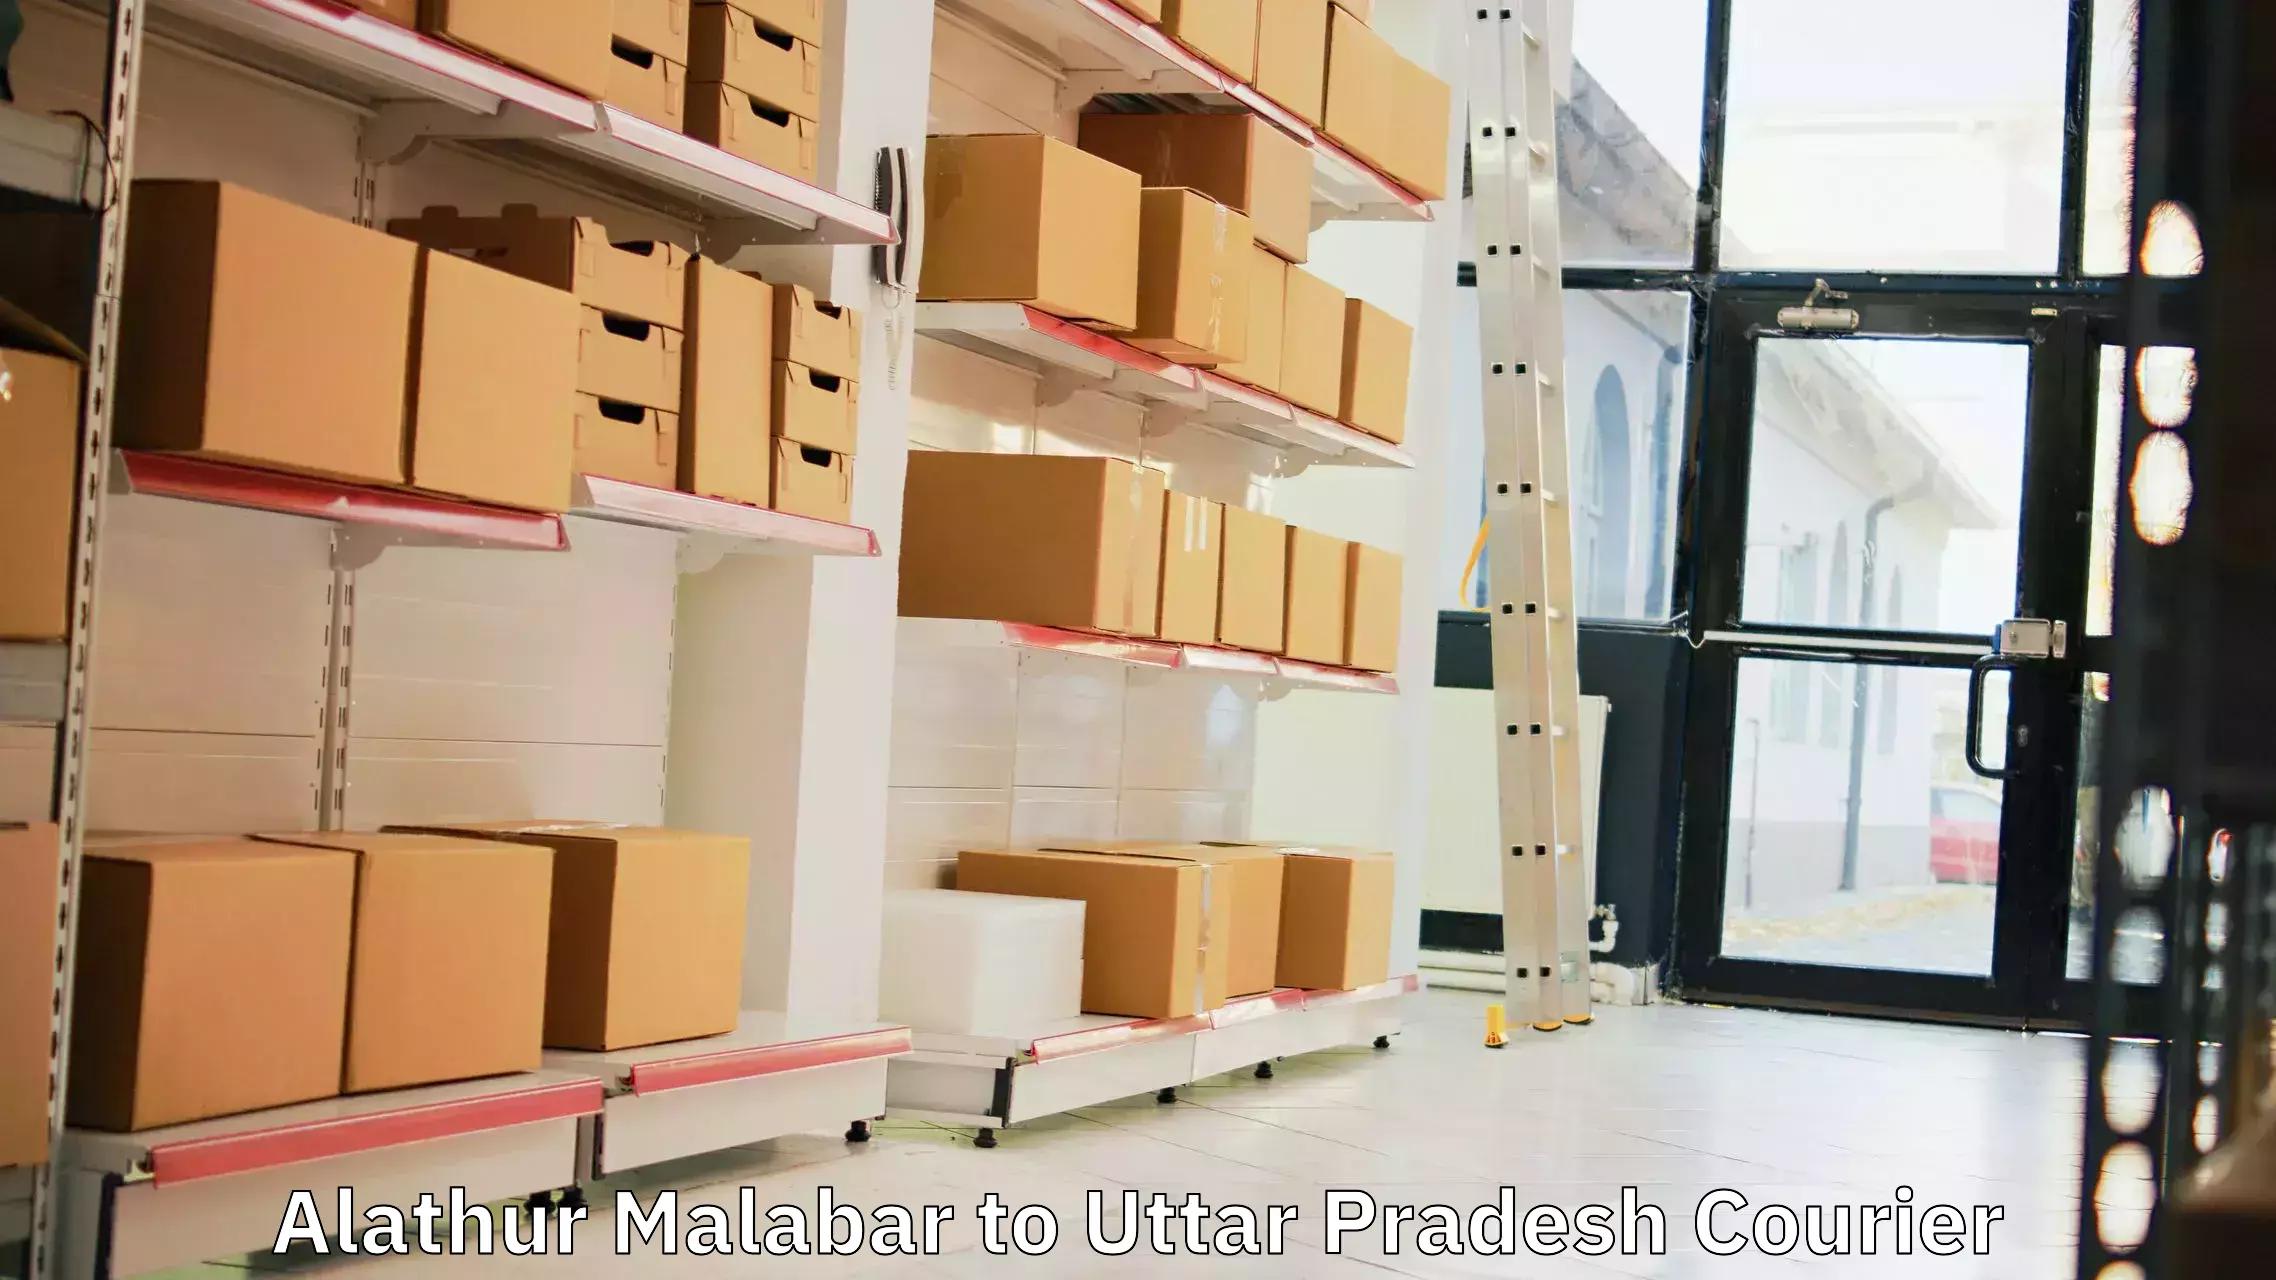 Reliable parcel services Alathur Malabar to Allahabad